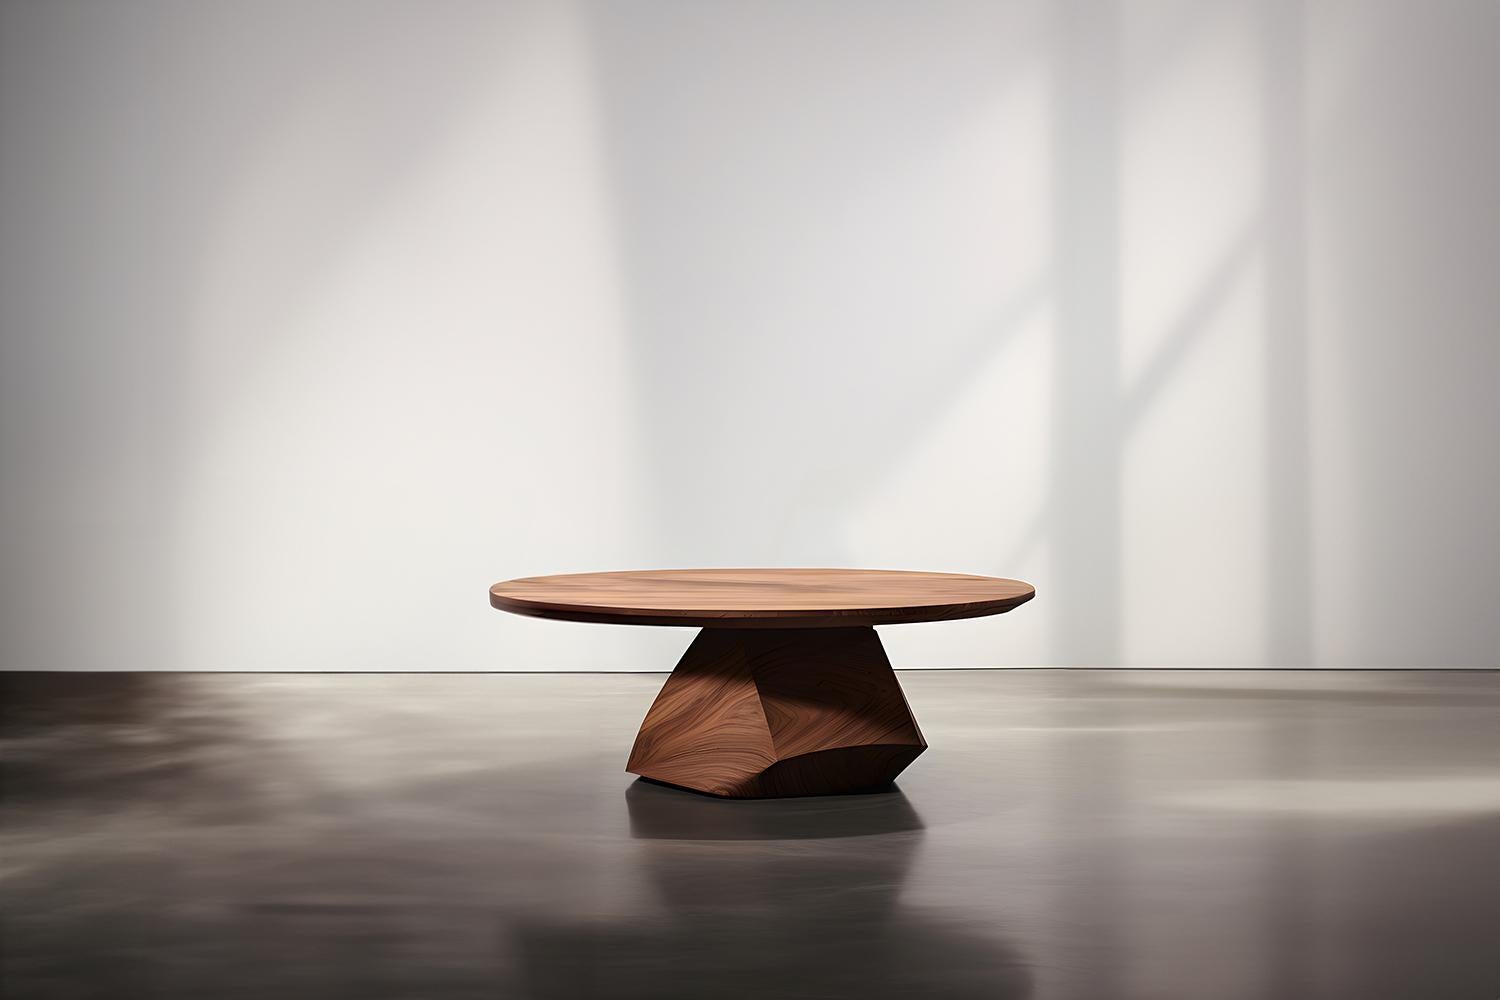 Sculptural Coffee Table Made of Solid Wood, Center Table Solace S29 by Joel Escalona


The Solace table series, designed by Joel Escalona, is a furniture collection that exudes balance and presence, thanks to its sensuous, dense, and irregular